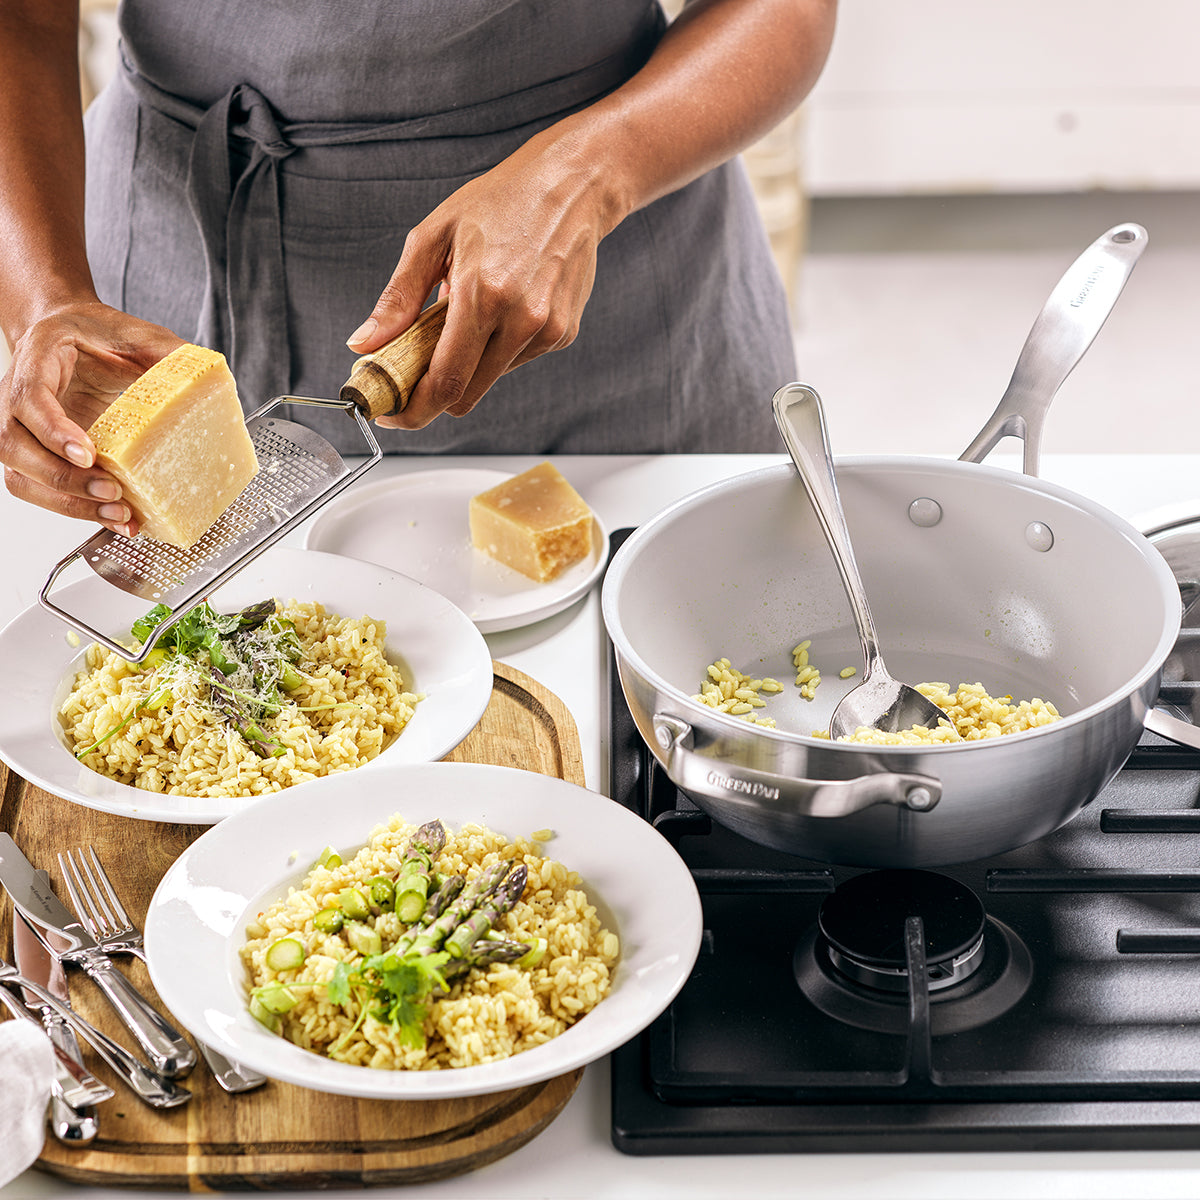 Stainless Steel Cookware: Top Choice of Professional Chefs